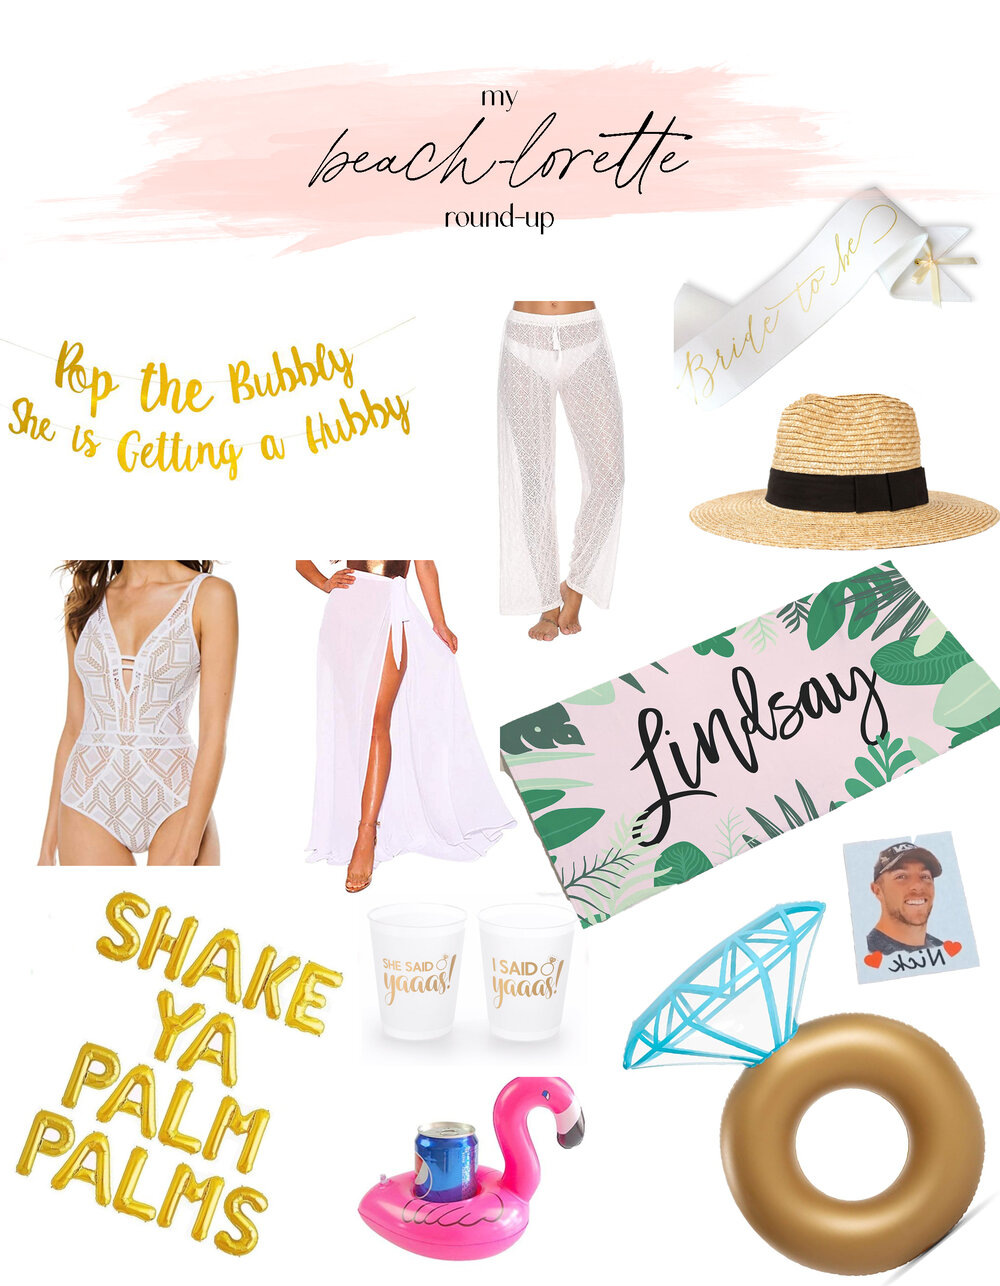 My Beach-Lorette Party Round-Up - Stefany Bare Blog